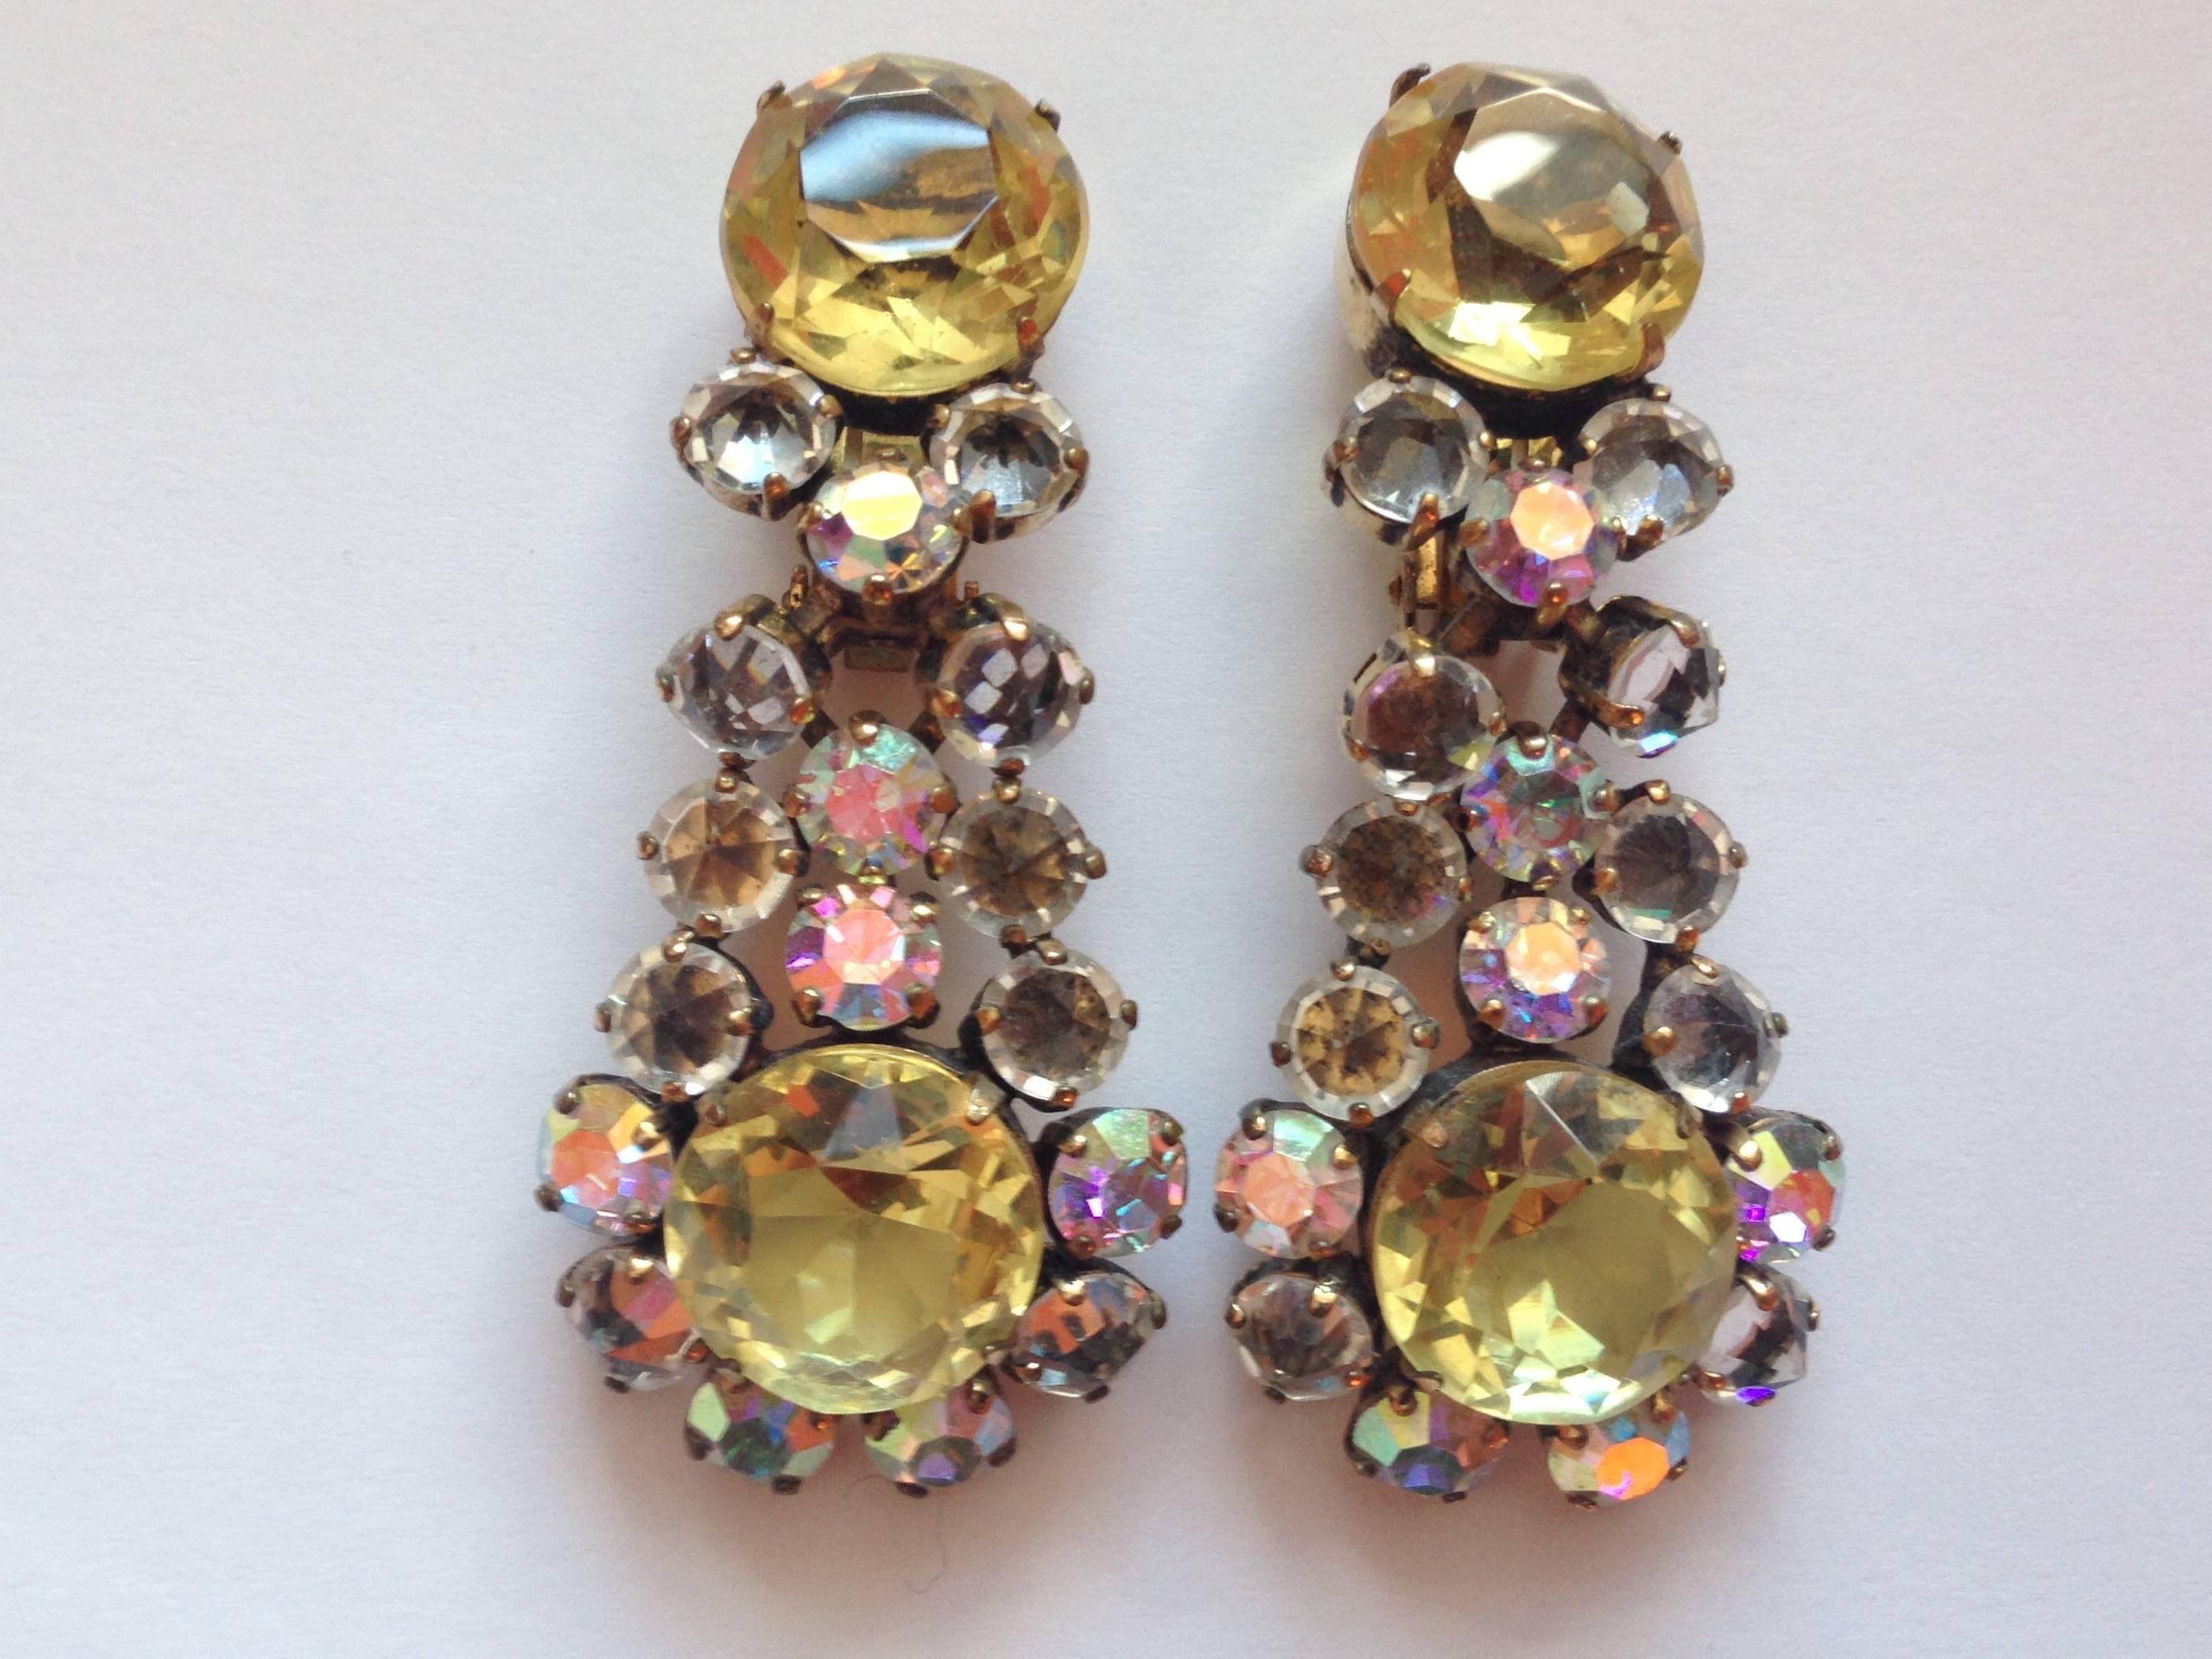 This is a beautiful pair of 1950s Schreiner chandelier clip-on earrings. They are gold toned metal with yellow and clear glass crystals with some stones set with pointed side up - a Schreiner trademark.  They measure 2 3/8" long x 1" wide